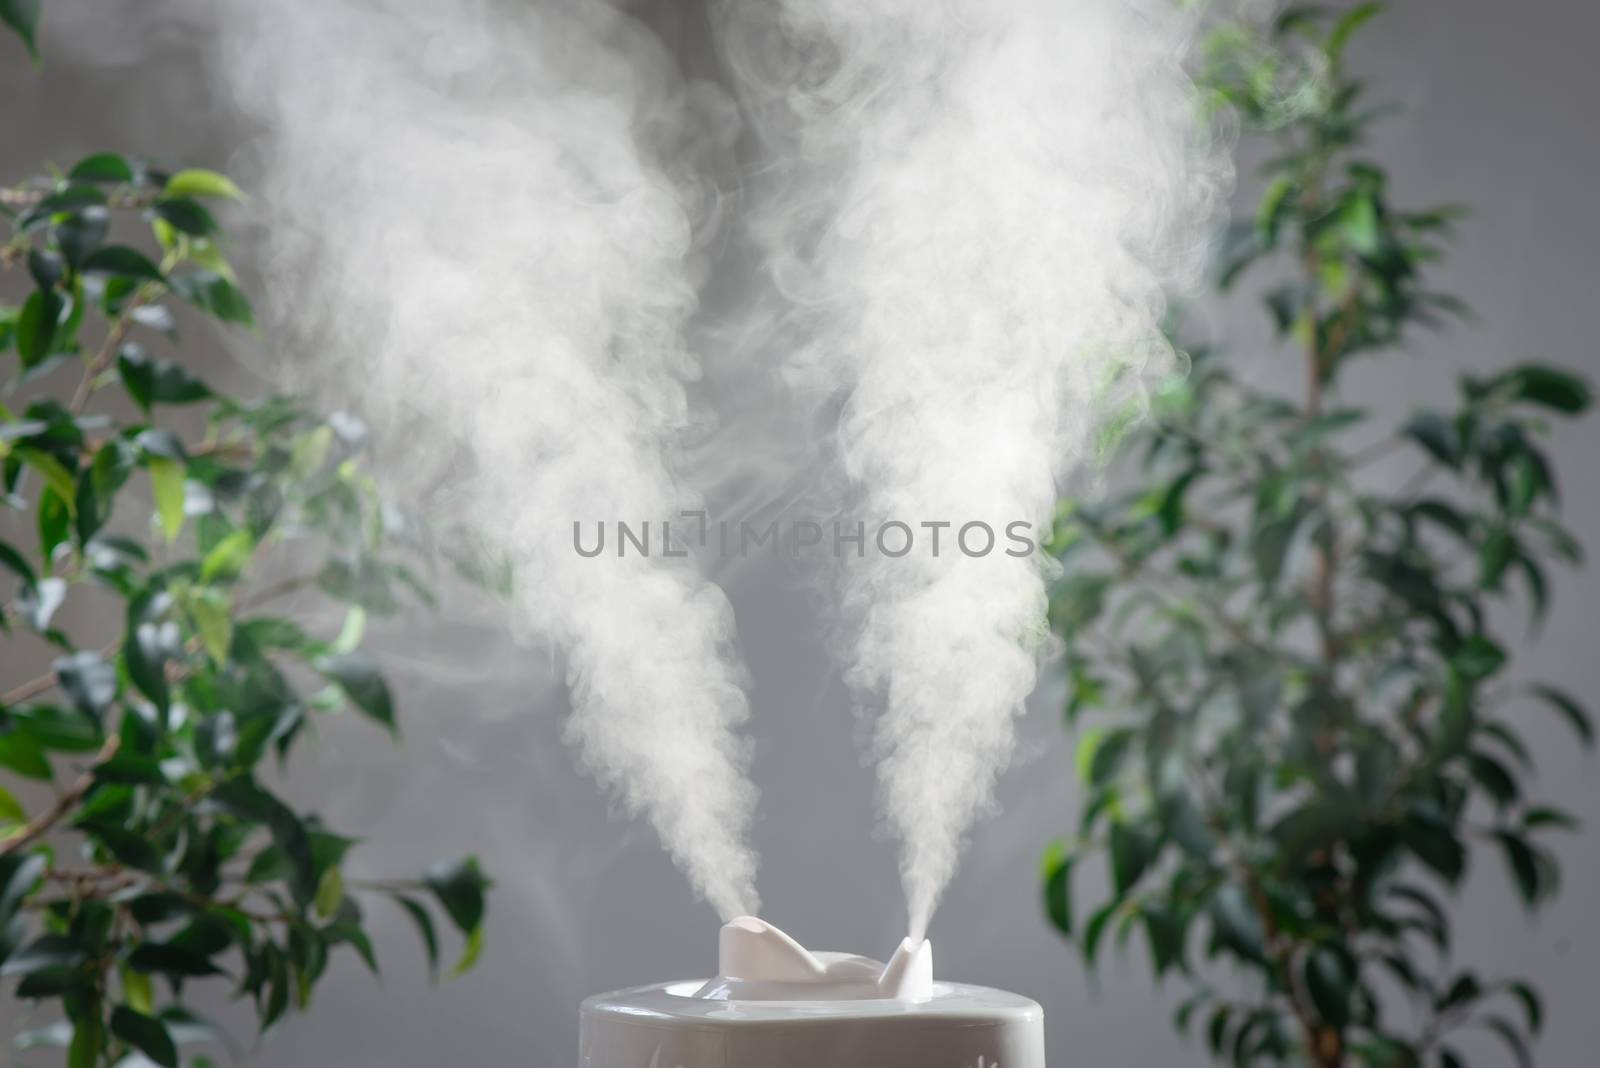 ultrasonic humidifier in the house. Humidification. Vapor by Draw05